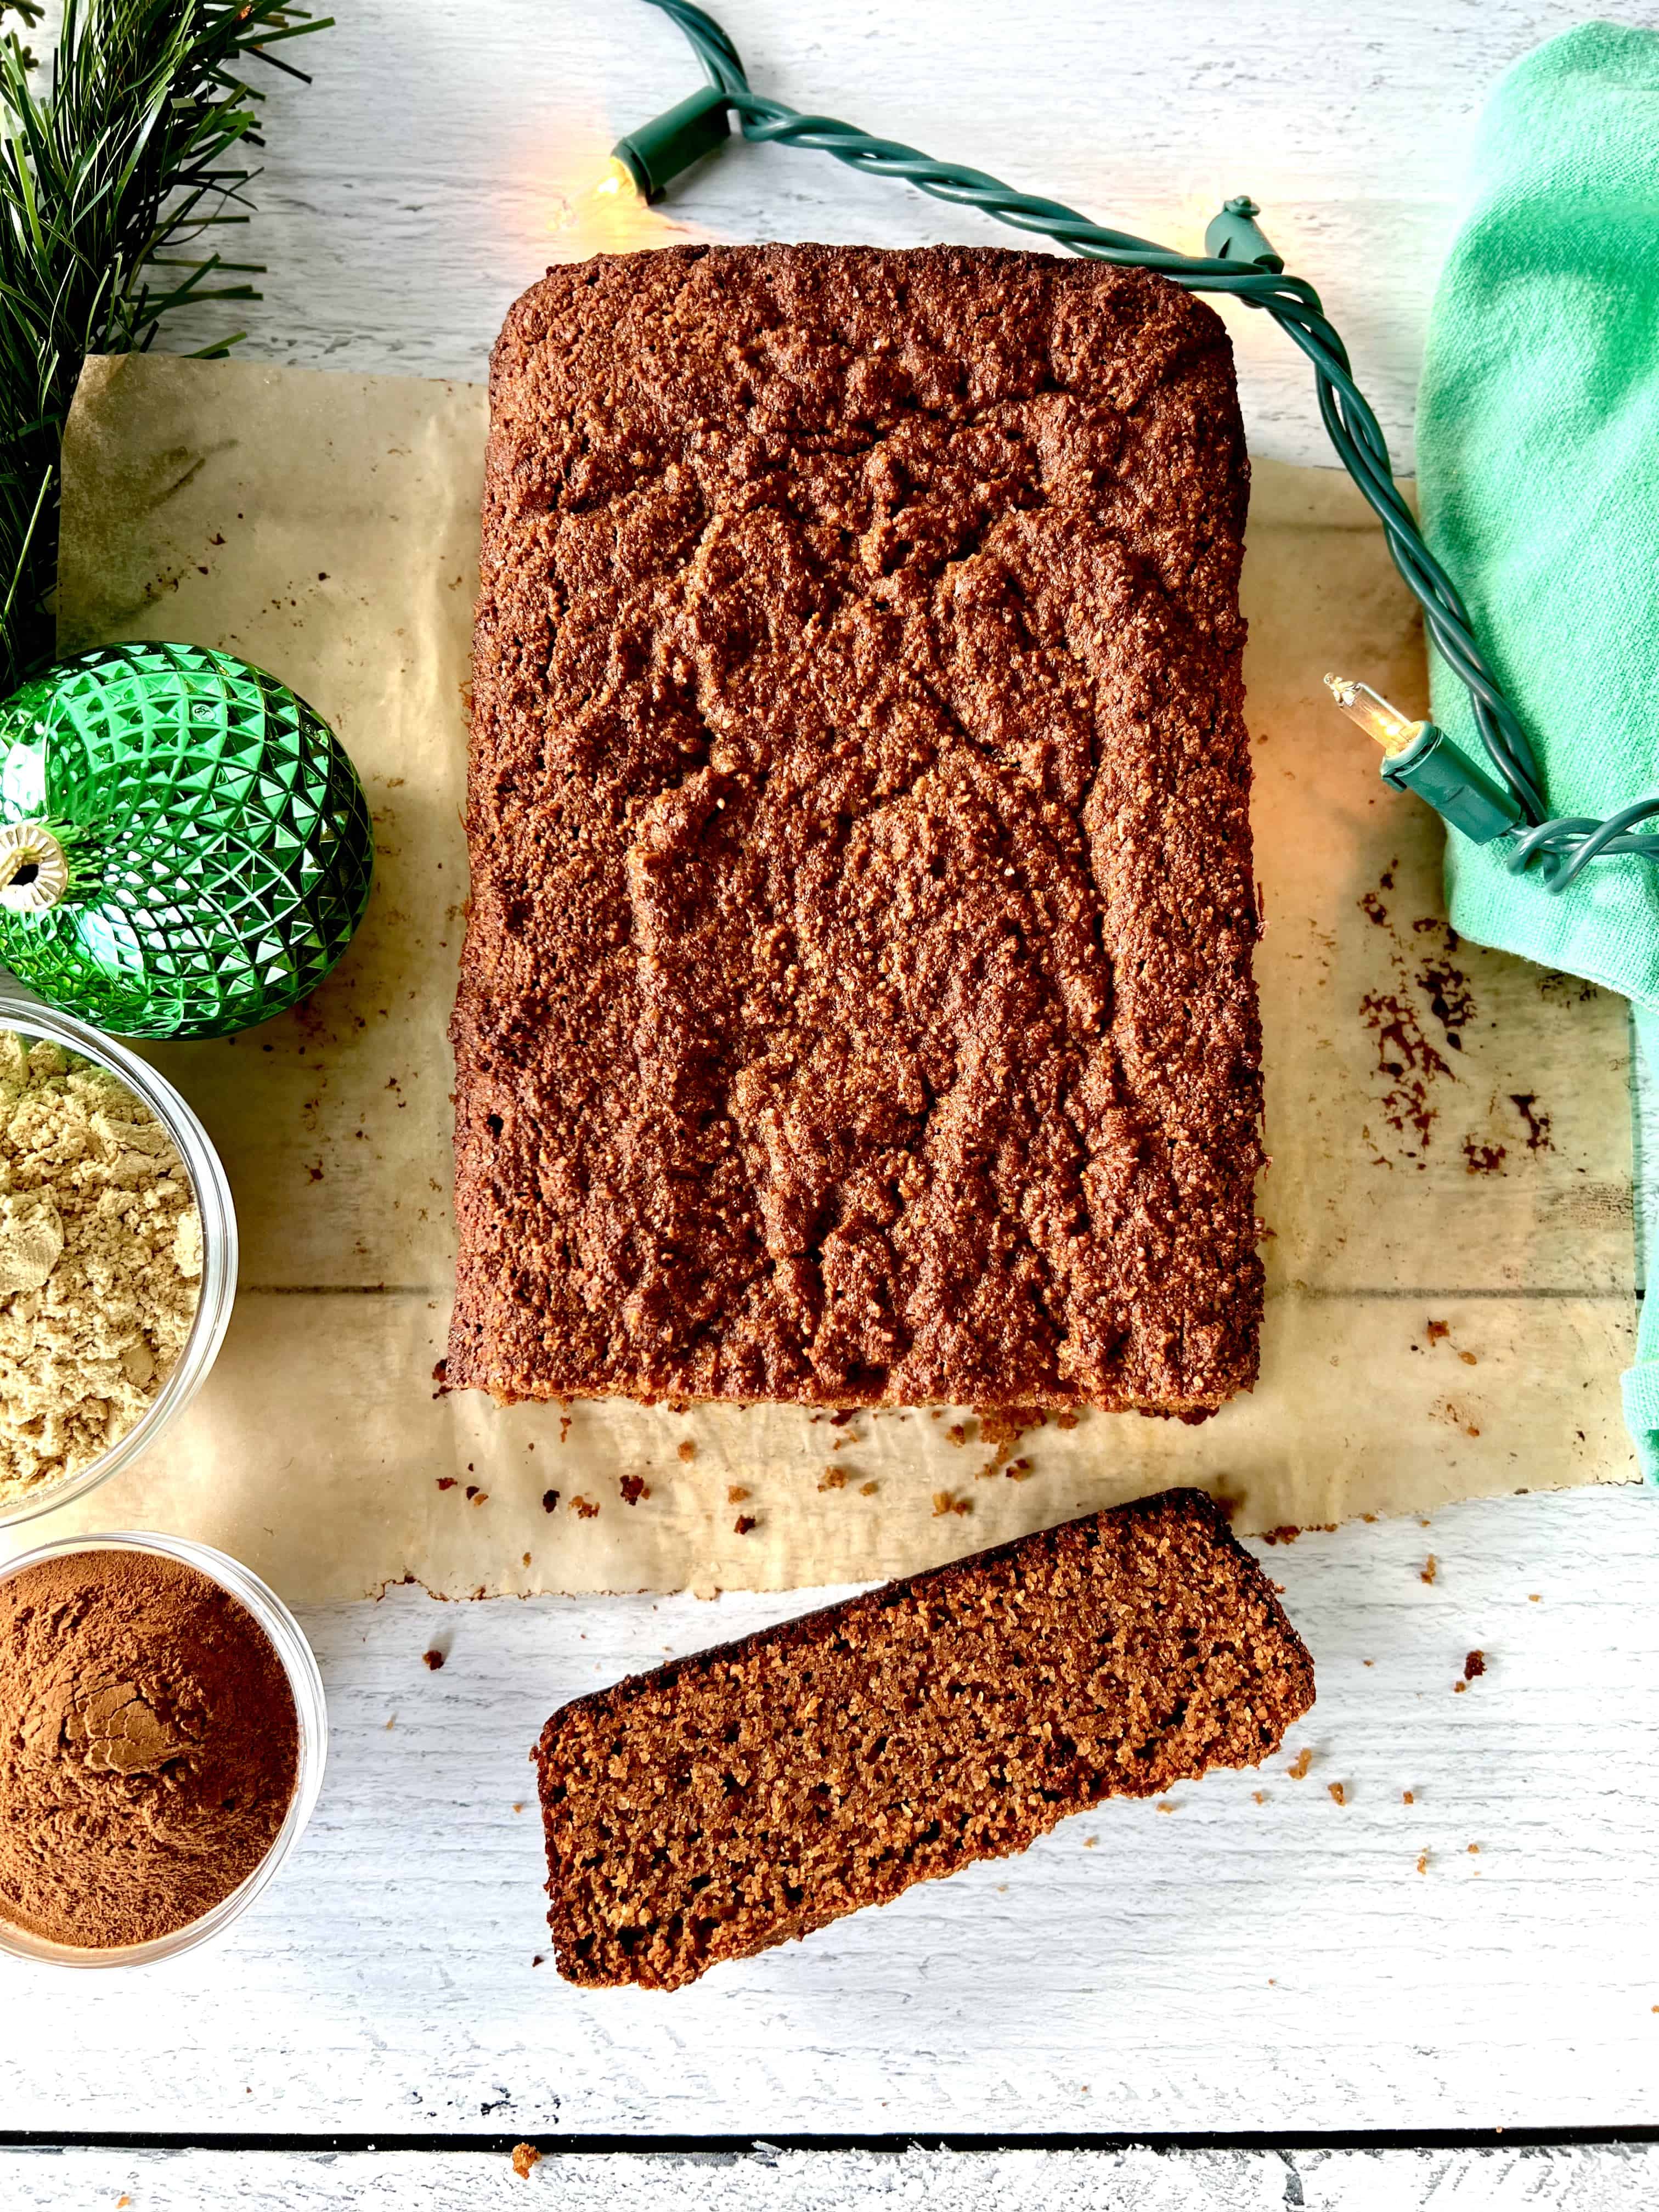 grain free gingerbread sliced on parchment paper on a white wooden table between Christmas lights, a green napkin, a green ornament and small bowls of spices